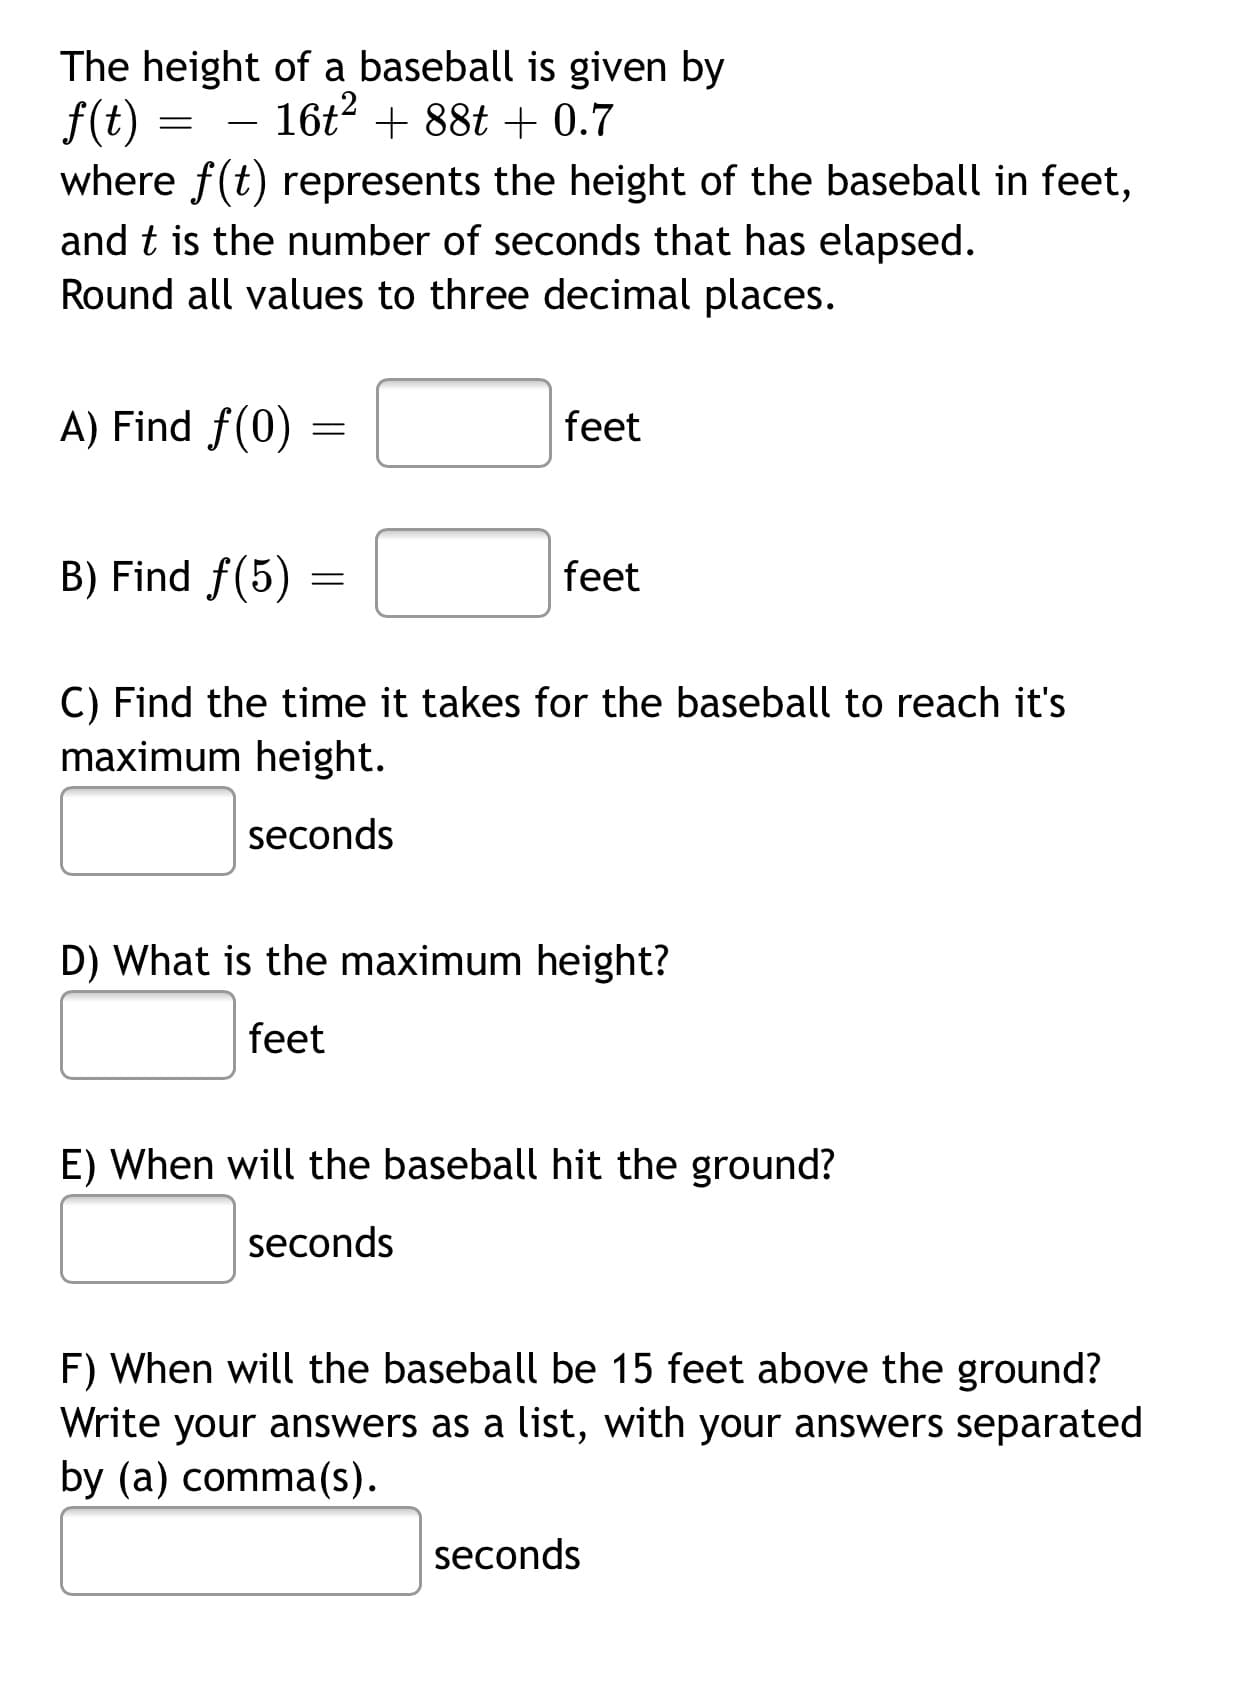 The height of a baseball is given by
f(t) =
where f(t) represents the height of the baseball in feet,
and t is the number of seconds that has elapsed.
Round all values to three decimal places.
16t? + 88t + 0.7
-
A) Find f(0)
feet
B) Find f(5)
feet
C) Find the time it takes for the baseball to reach it's
maximum height.
seconds
